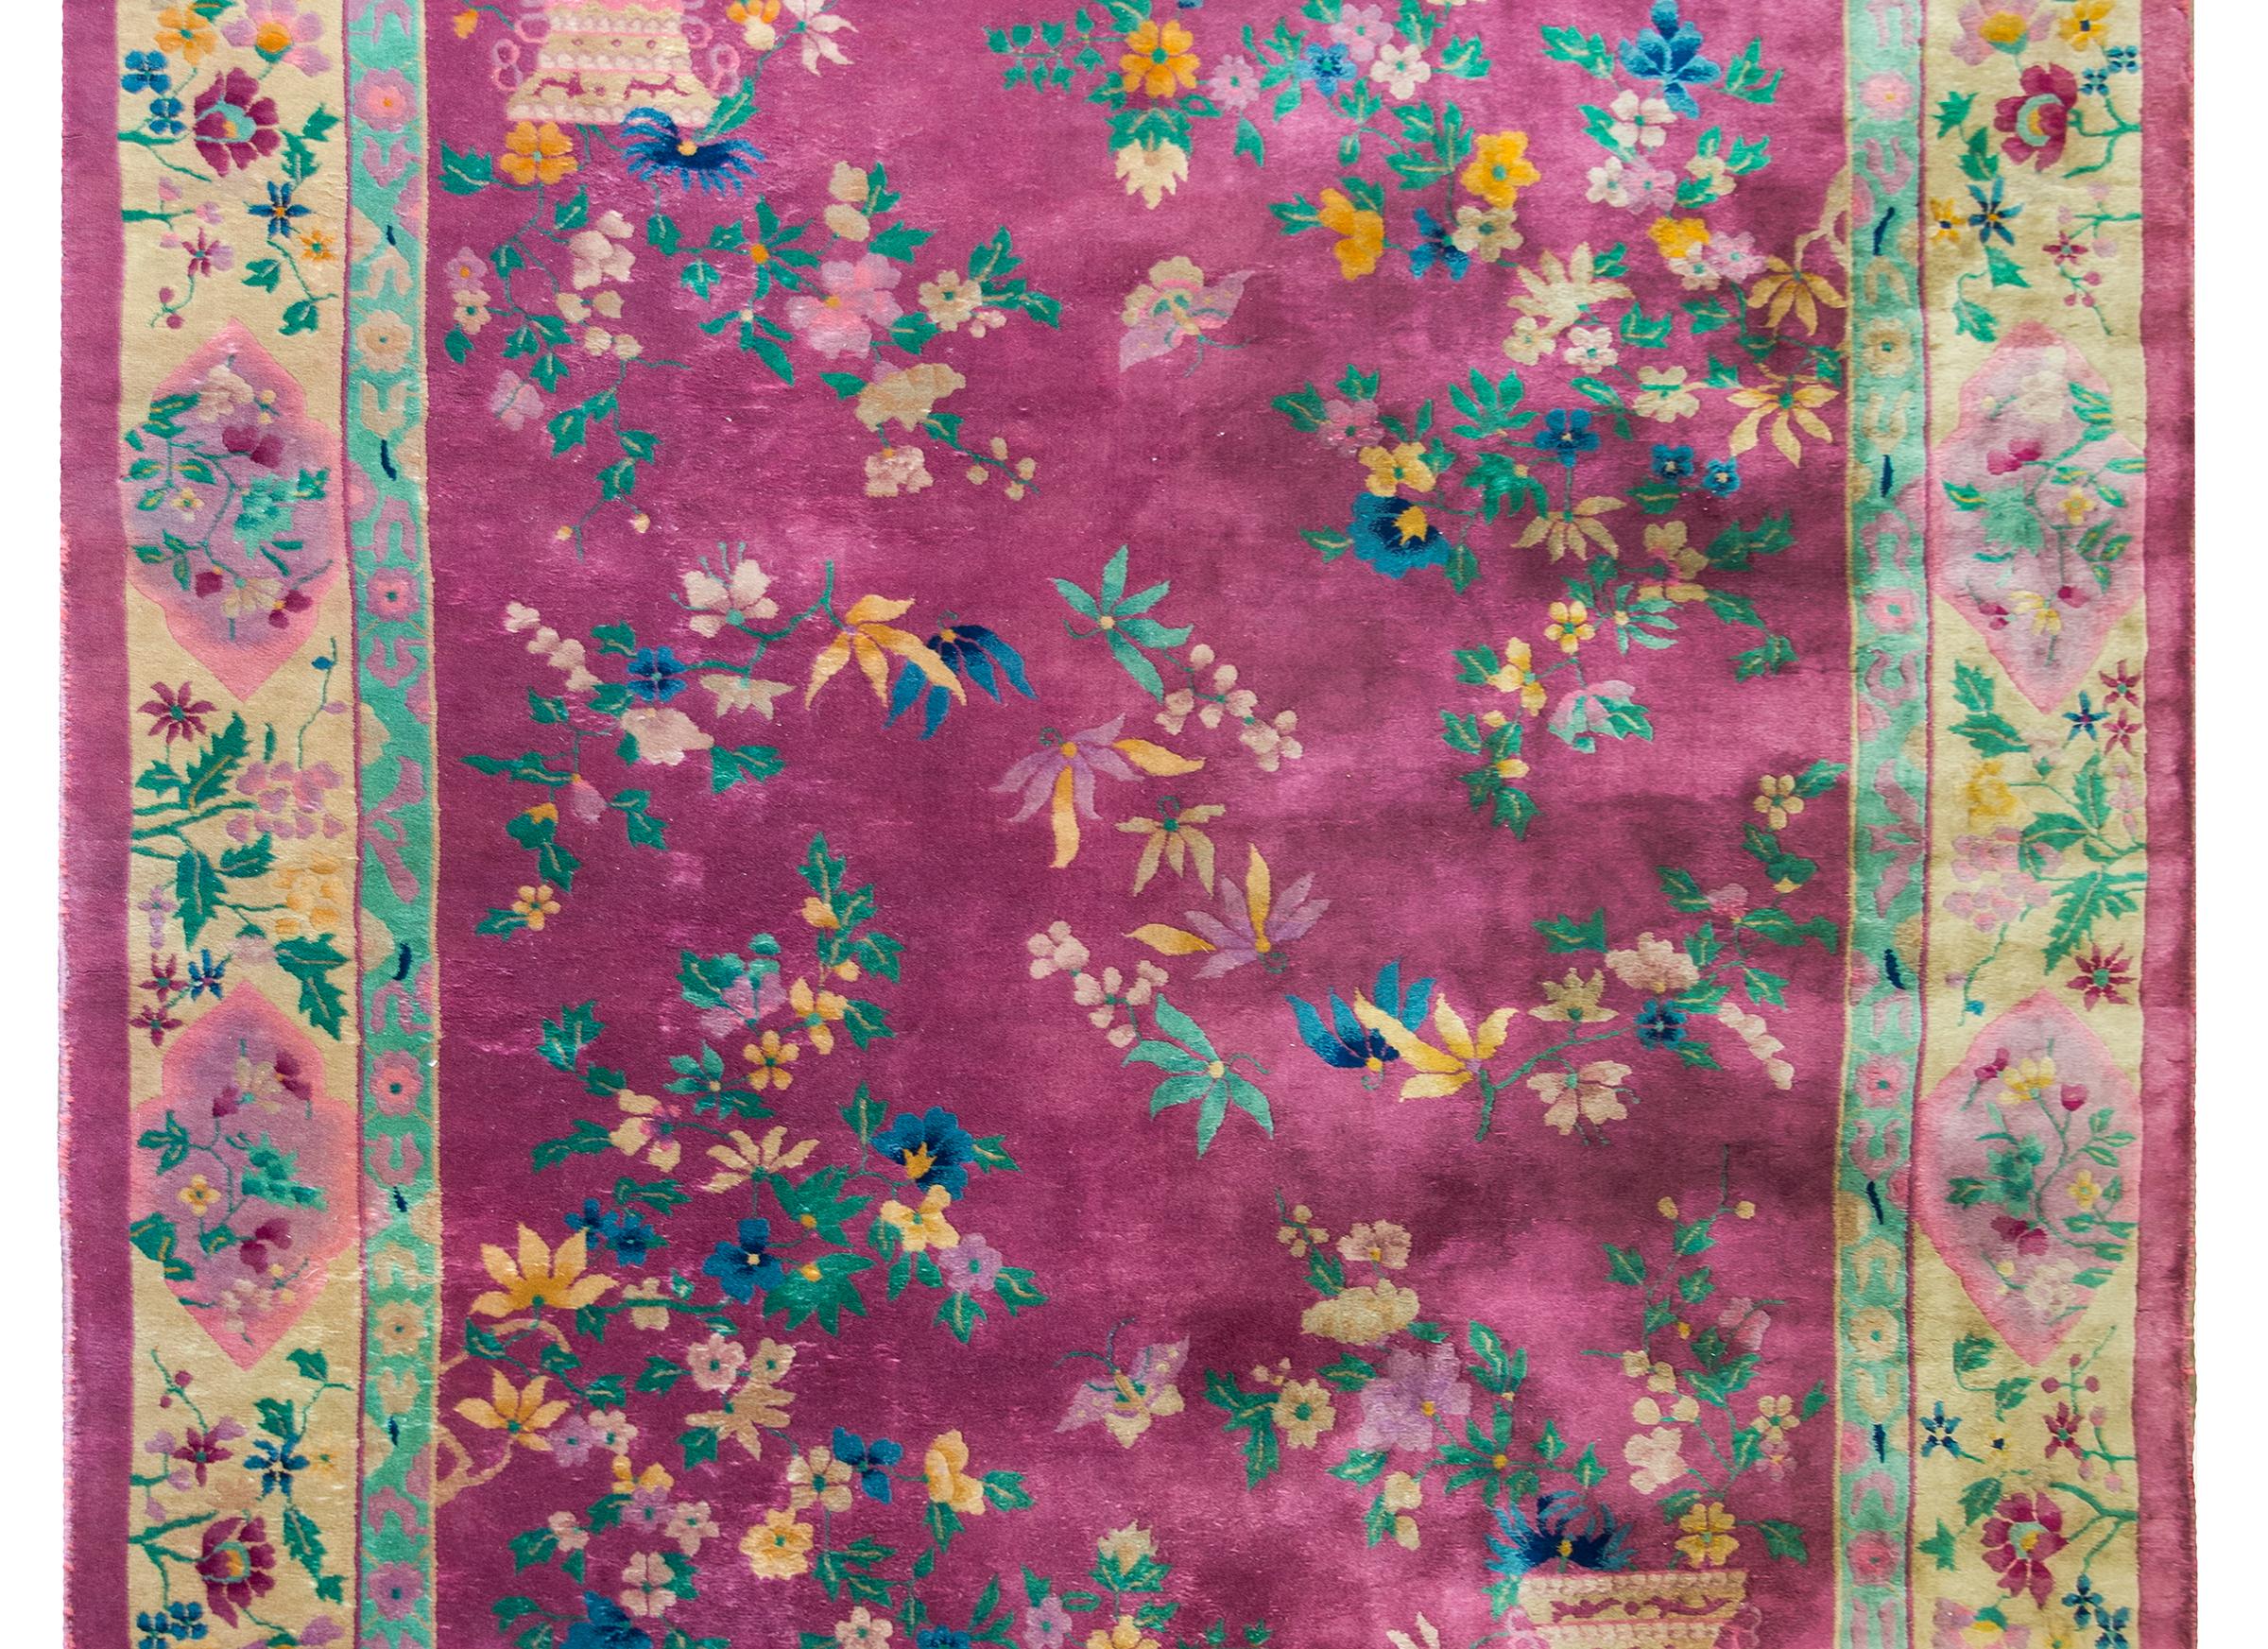 A beautiful early 20th century Chinese Art Deco rug with a mauve central field covered in myriad auspicious flowers including peonies, chrysanthemum, and cherry blossoms, and potted censors in opposite corners, and surrounded by a wide border with